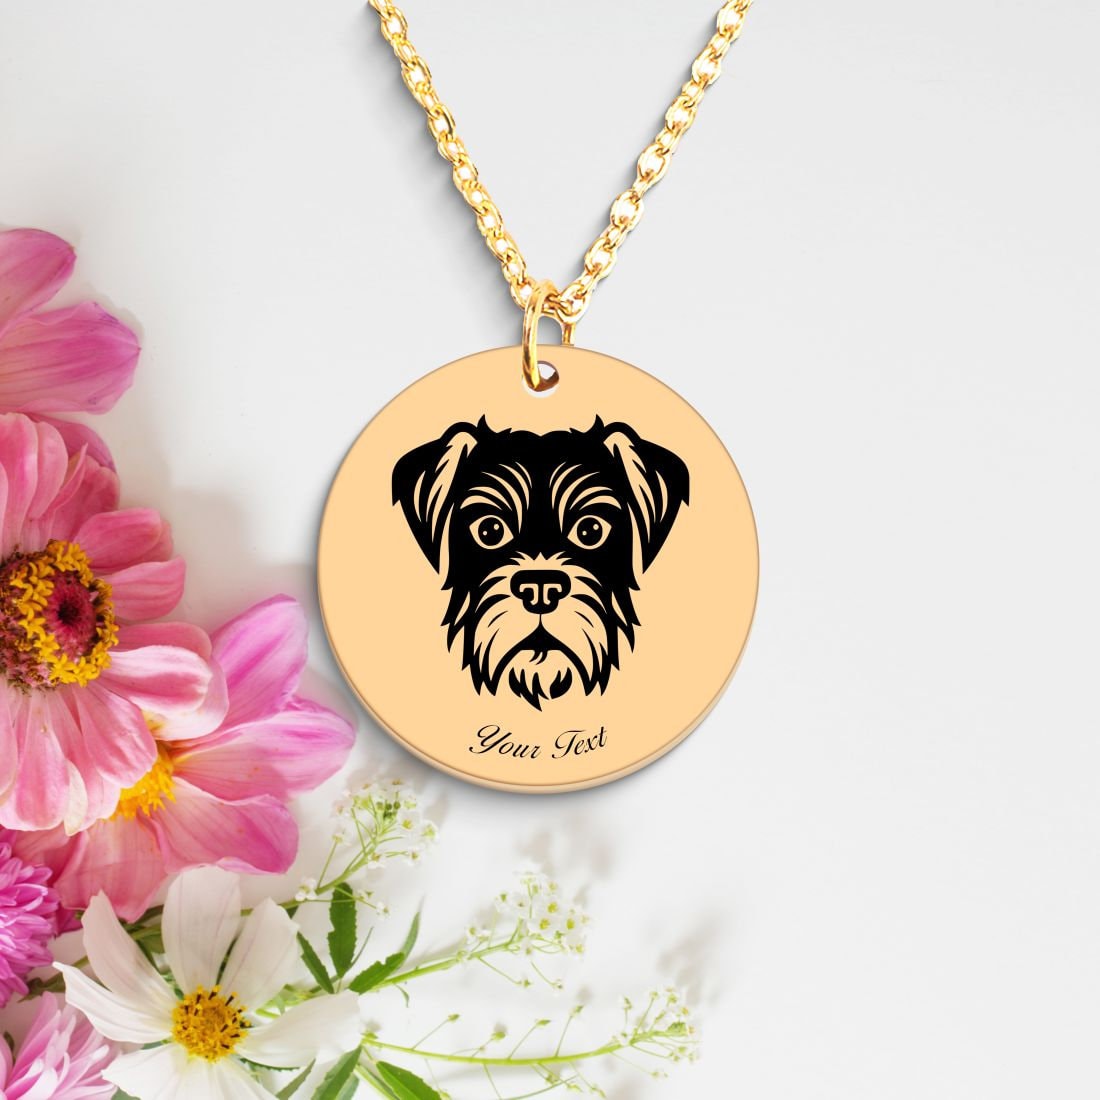 Border Terrier Dog Portrait Necklace - Personalizable Jewelry